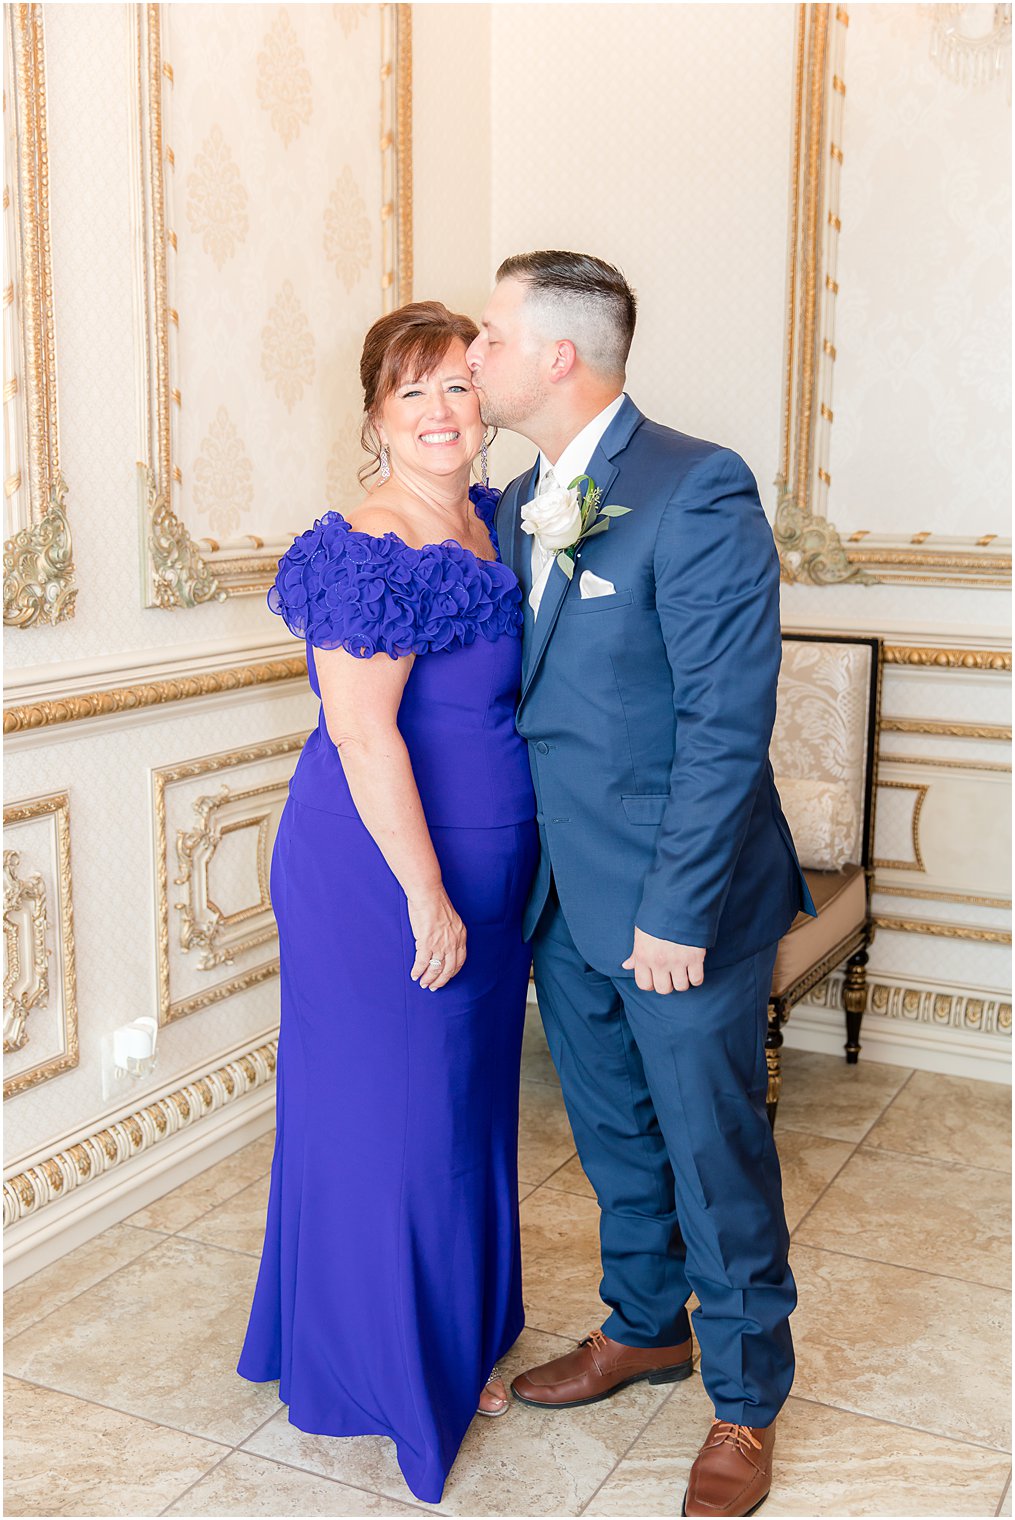 son kisses his mom on the cheek on his wedding day